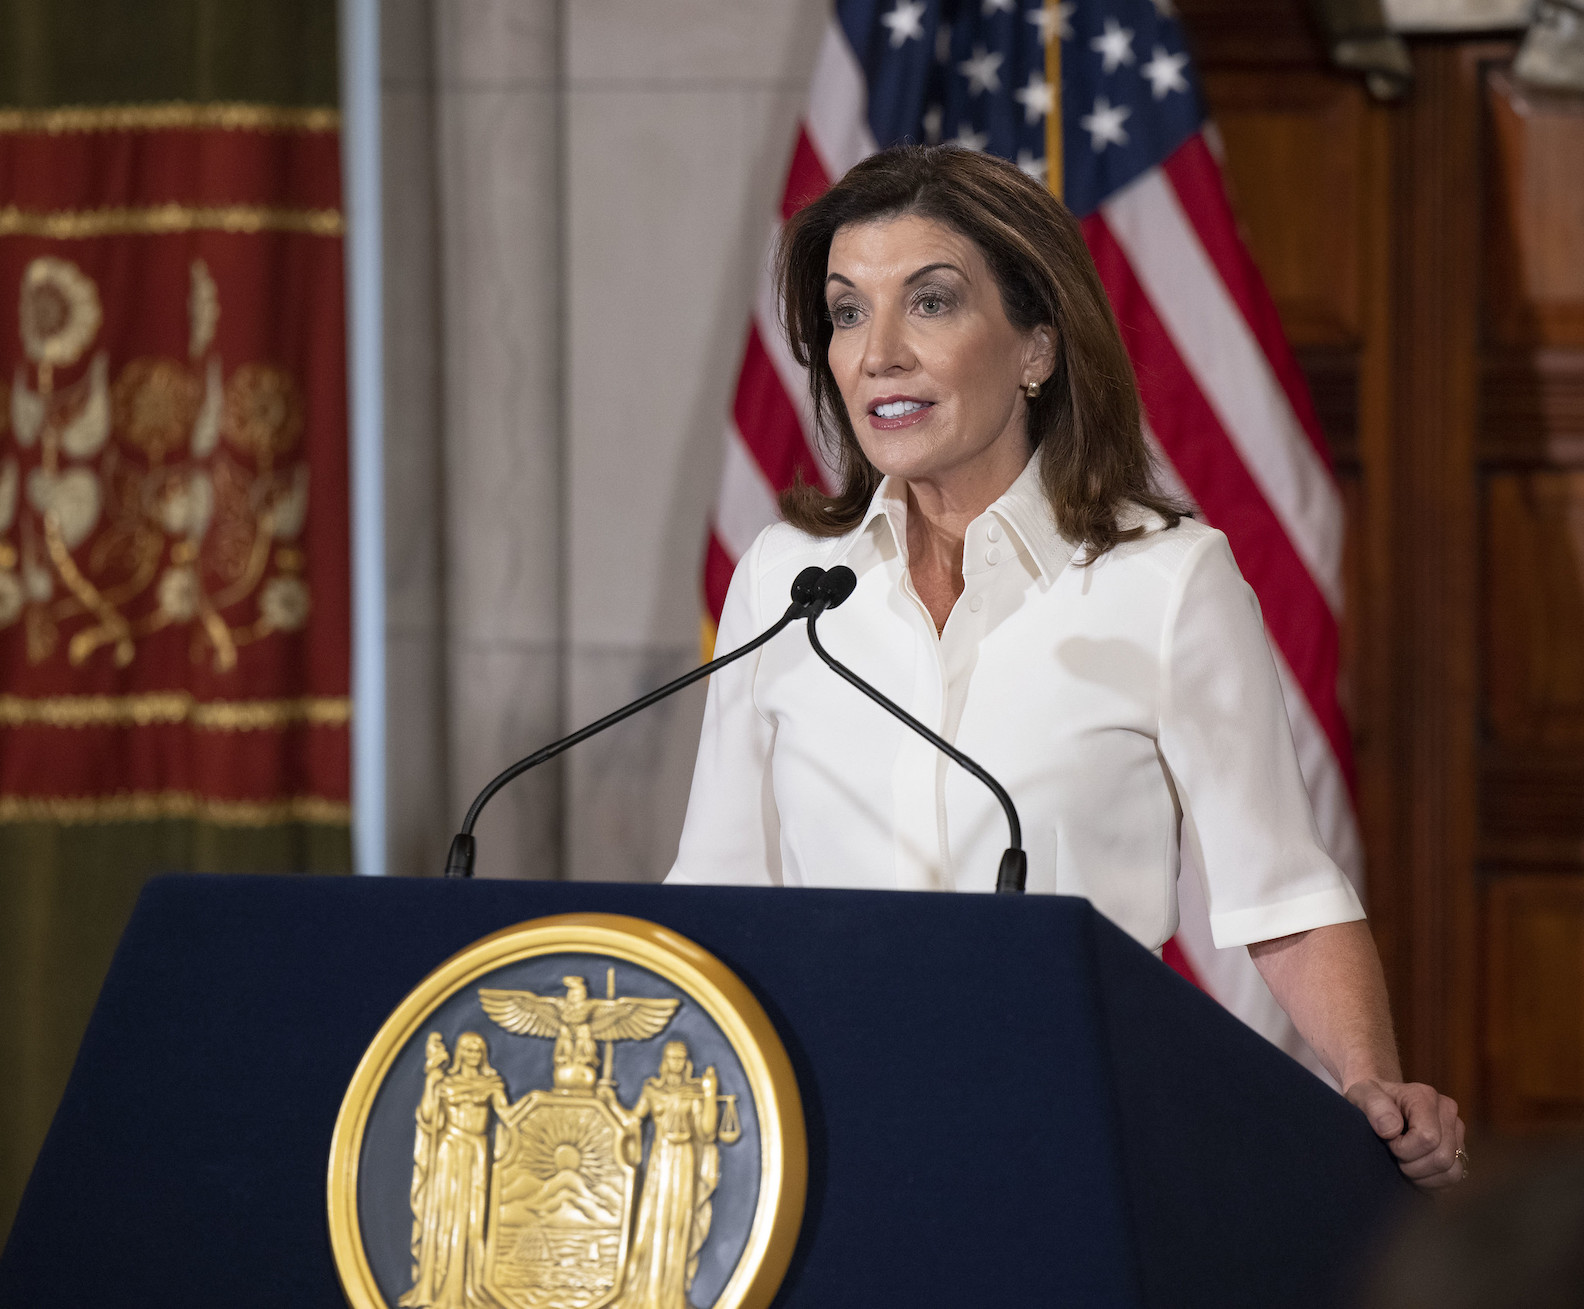 Gov. Kathy Hochul delivers an address to New Yorkers from the Red Room at the State Capitol. (Photo by Mike Groll/Office of Gov. Kathy Hochul)